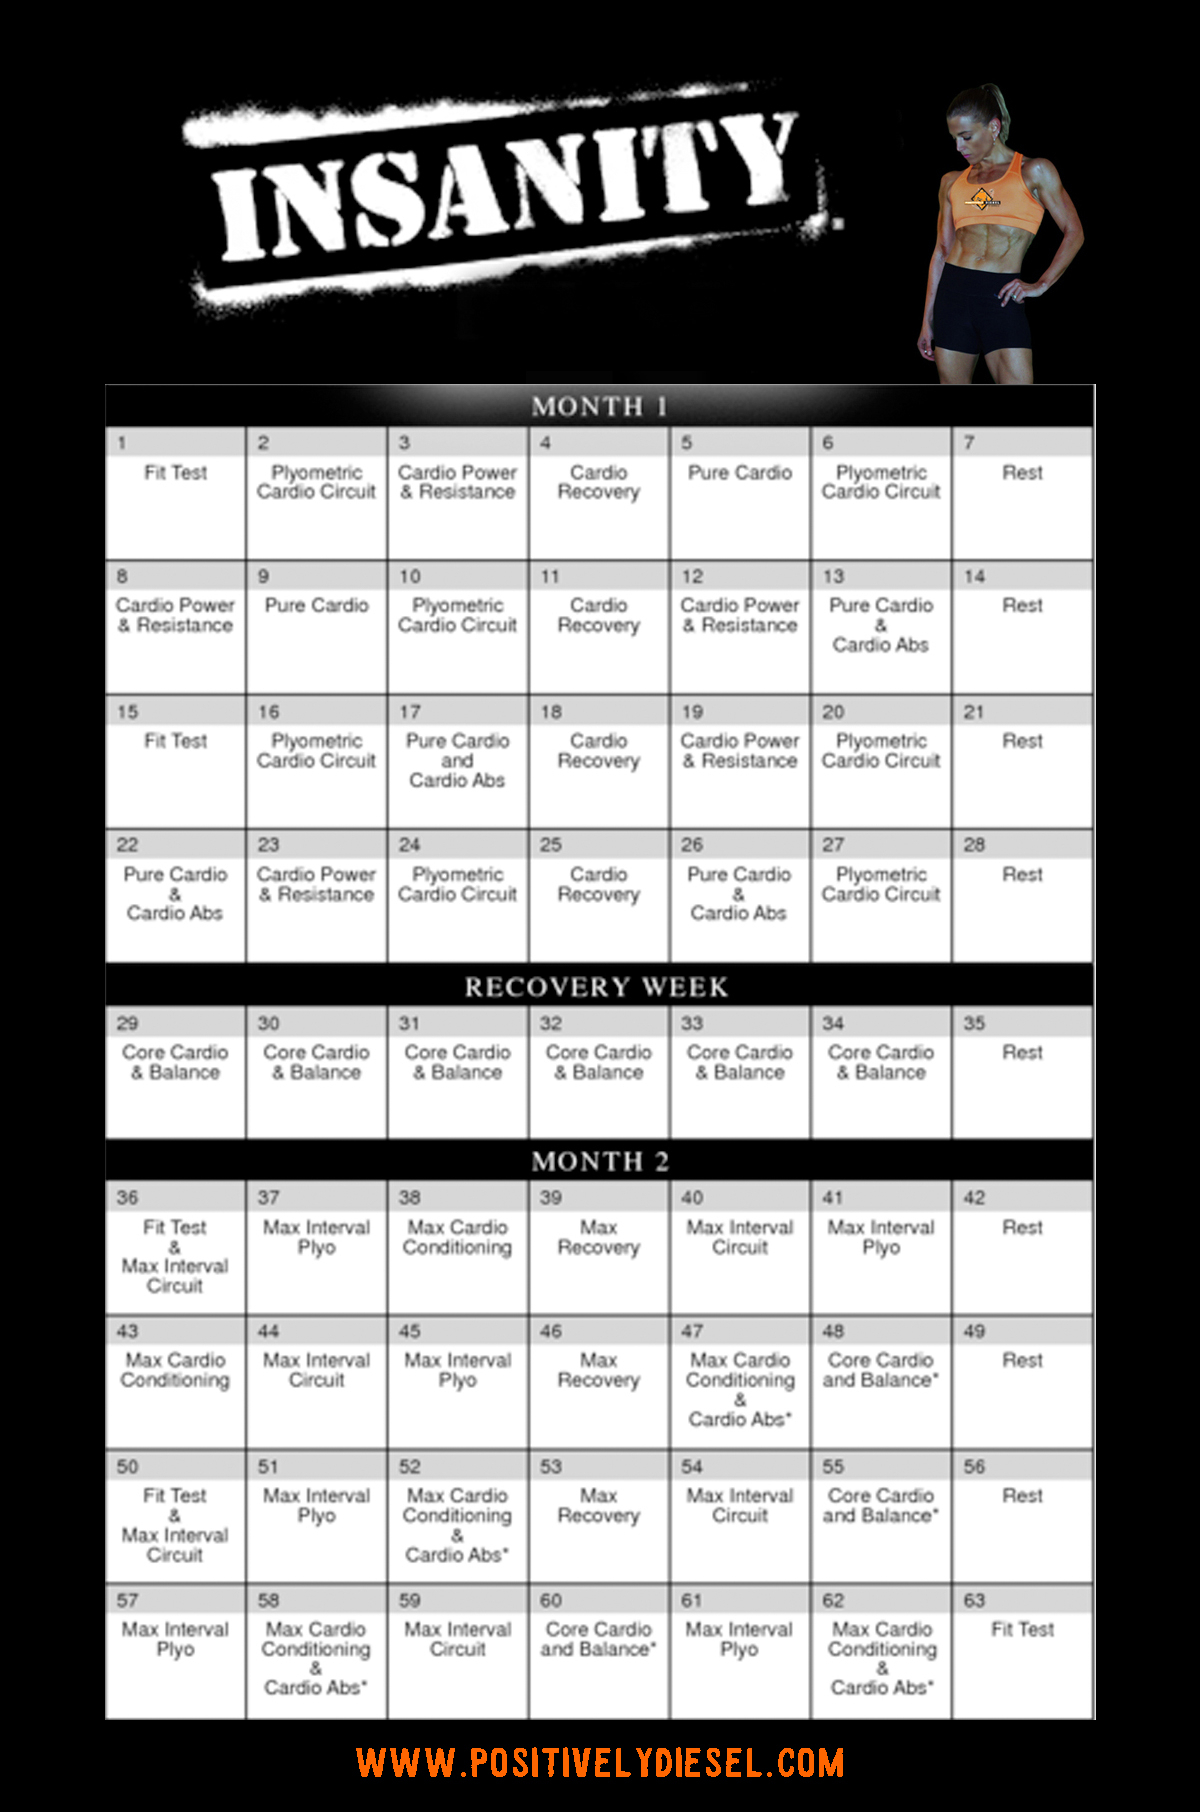 Insanity Max 30 Schedule Pdf | Calendar For Planning in Insanity Max 30 Schedule Month 2